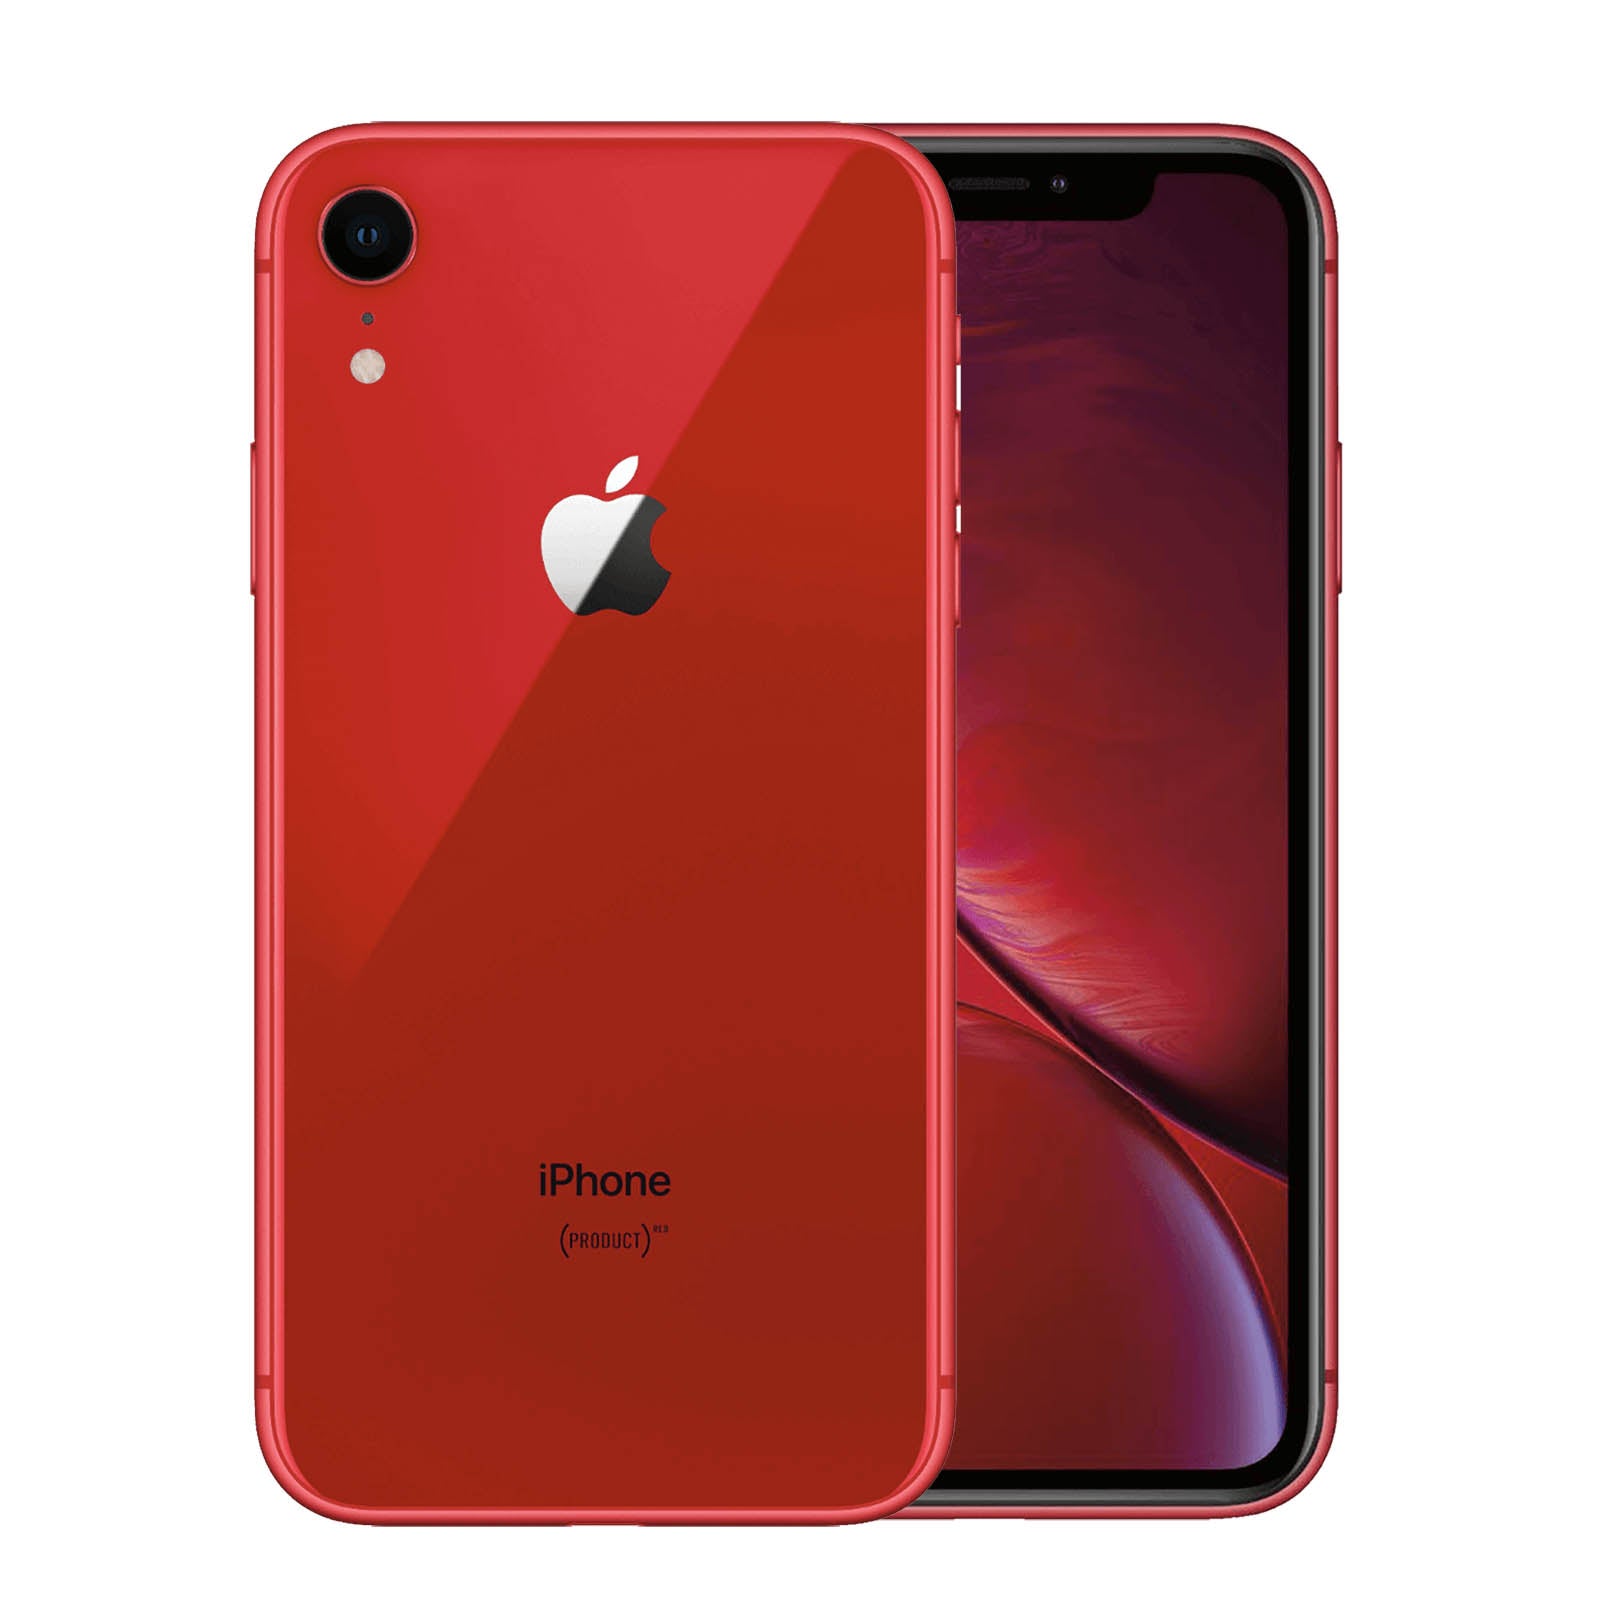 Apple iPhone XR 64GB Product Red Pristine - Unlocked